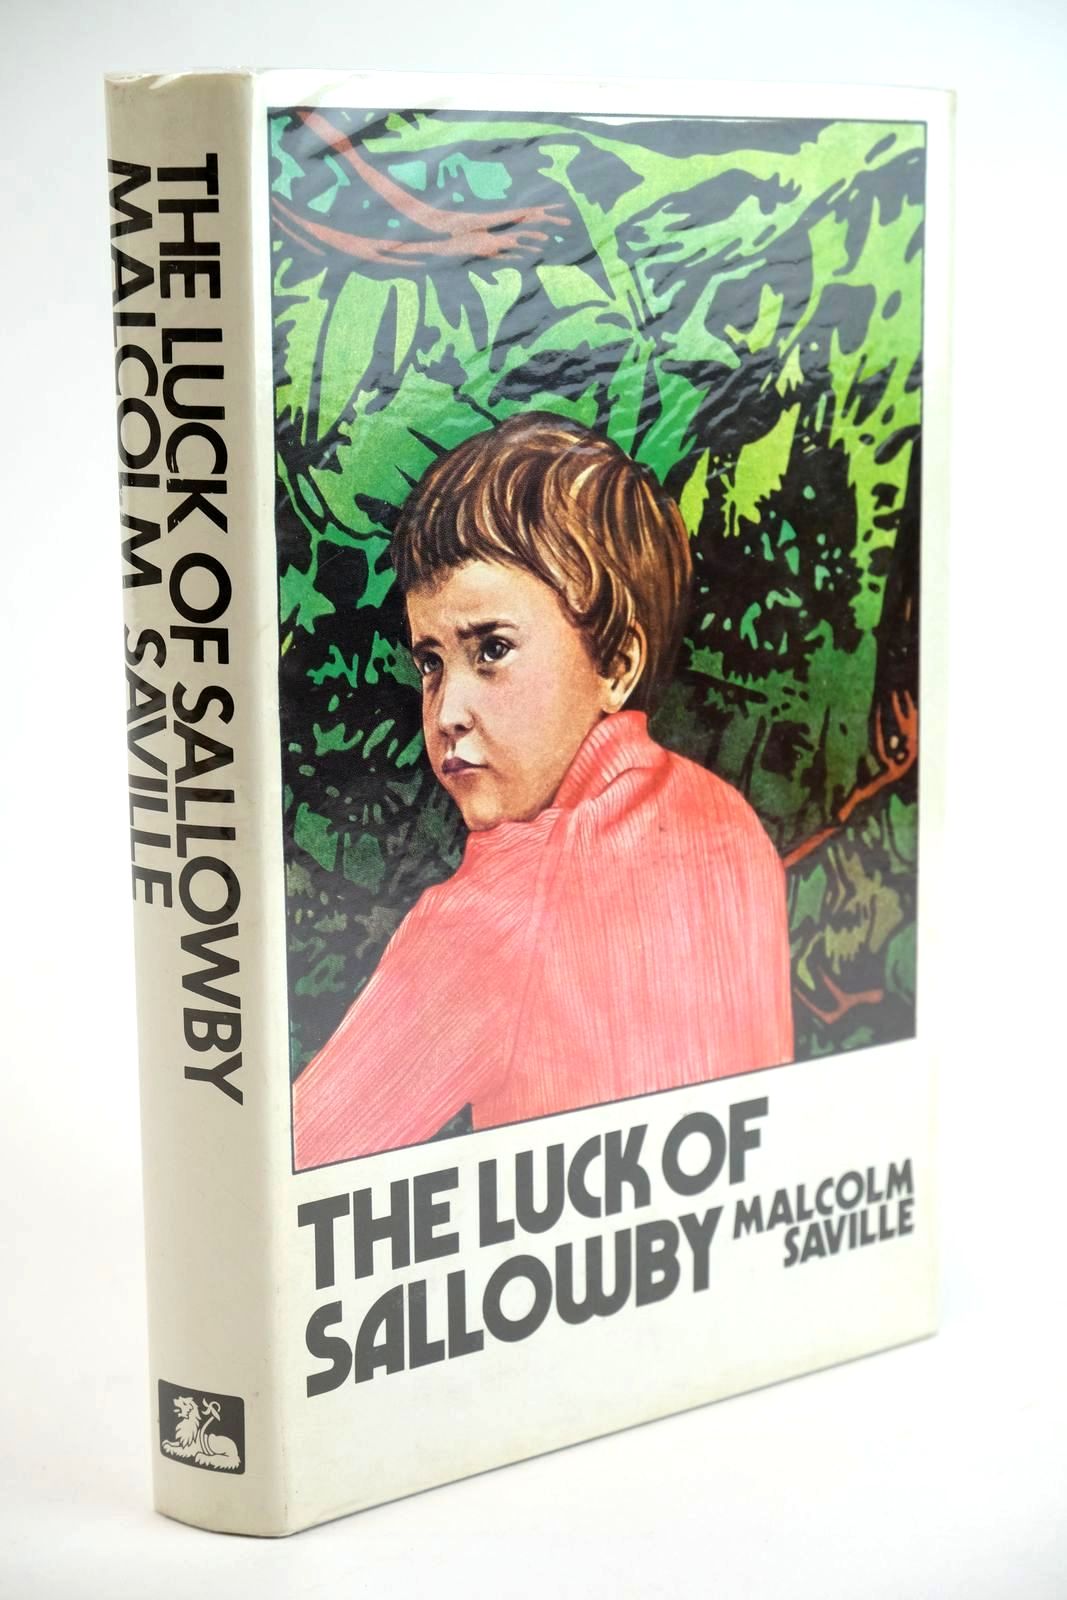 Photo of THE LUCK OF SALLOWBY- Stock Number: 1323372